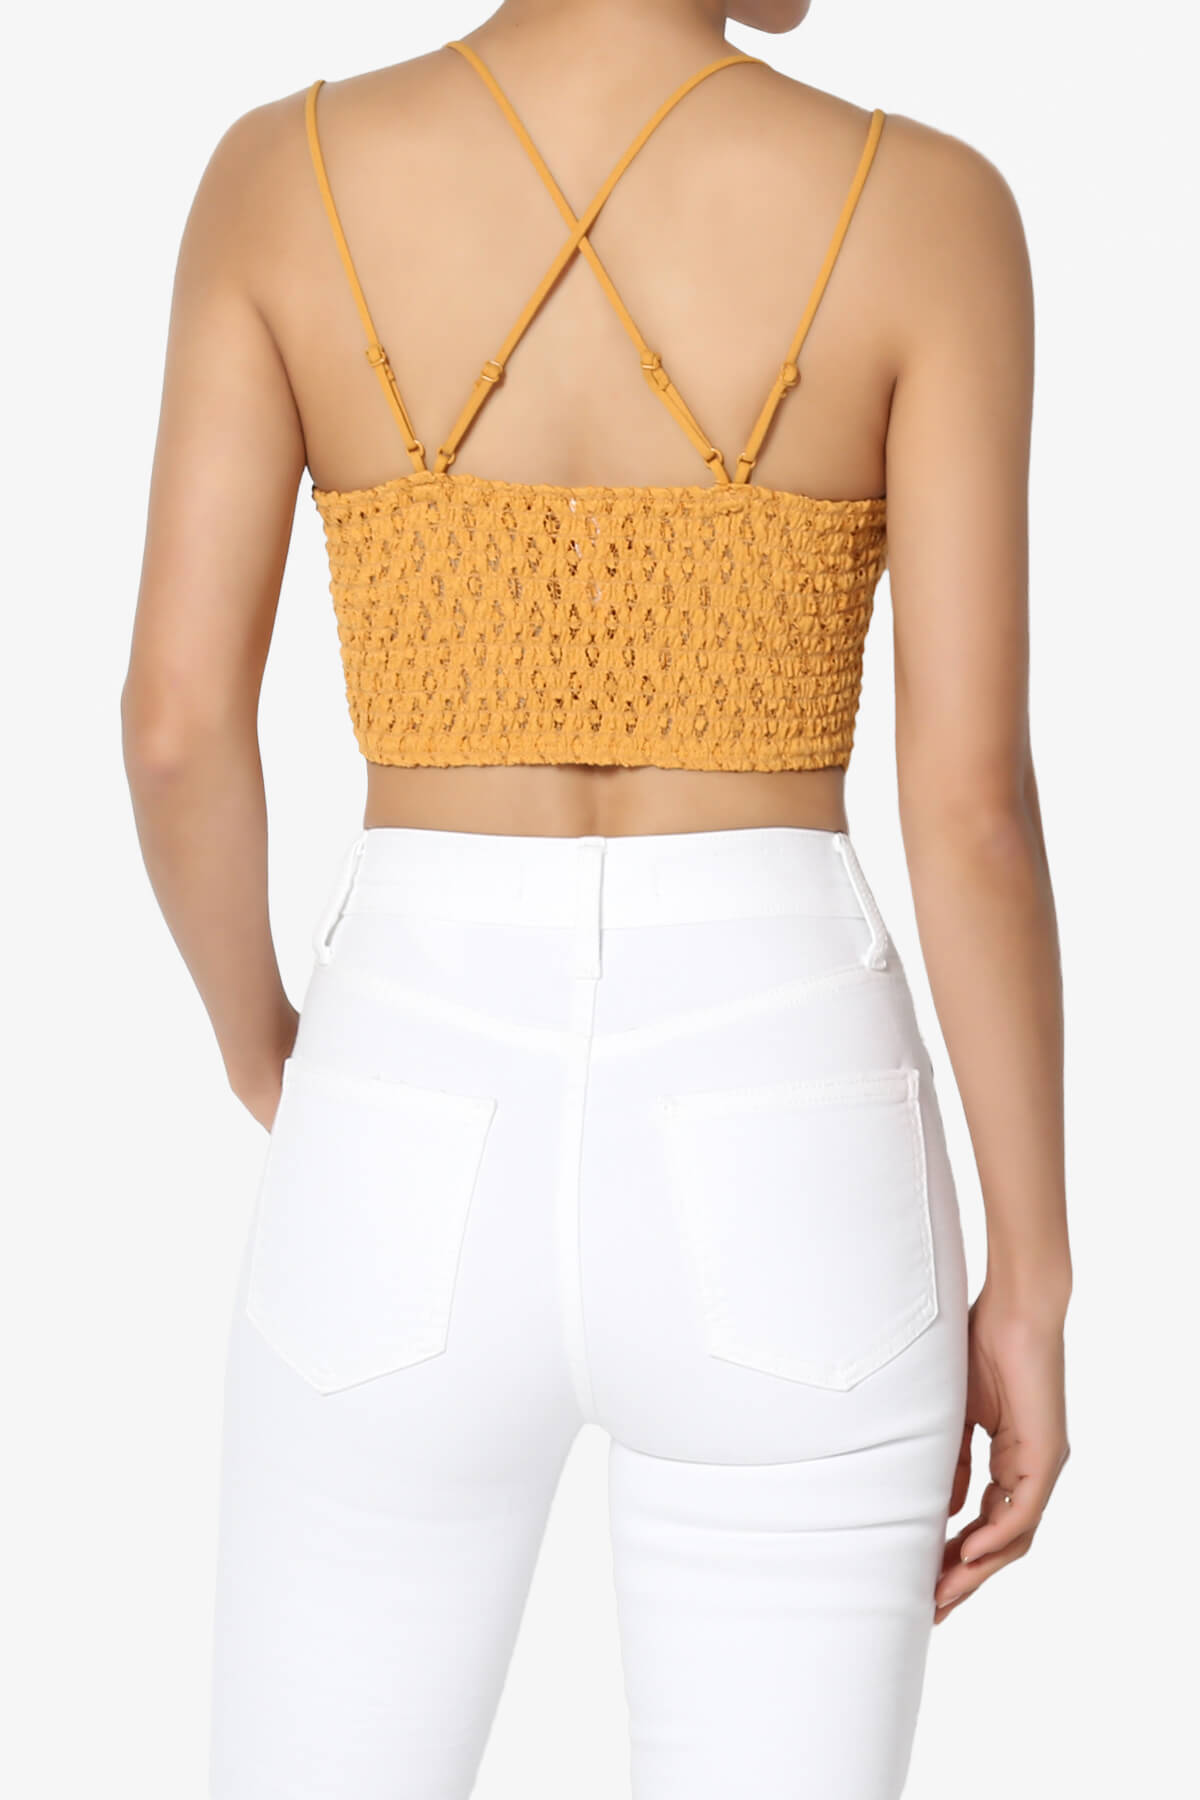 Load image into Gallery viewer, Adella Crochet Lace Bralette GOLDEN MUSTARD_2
